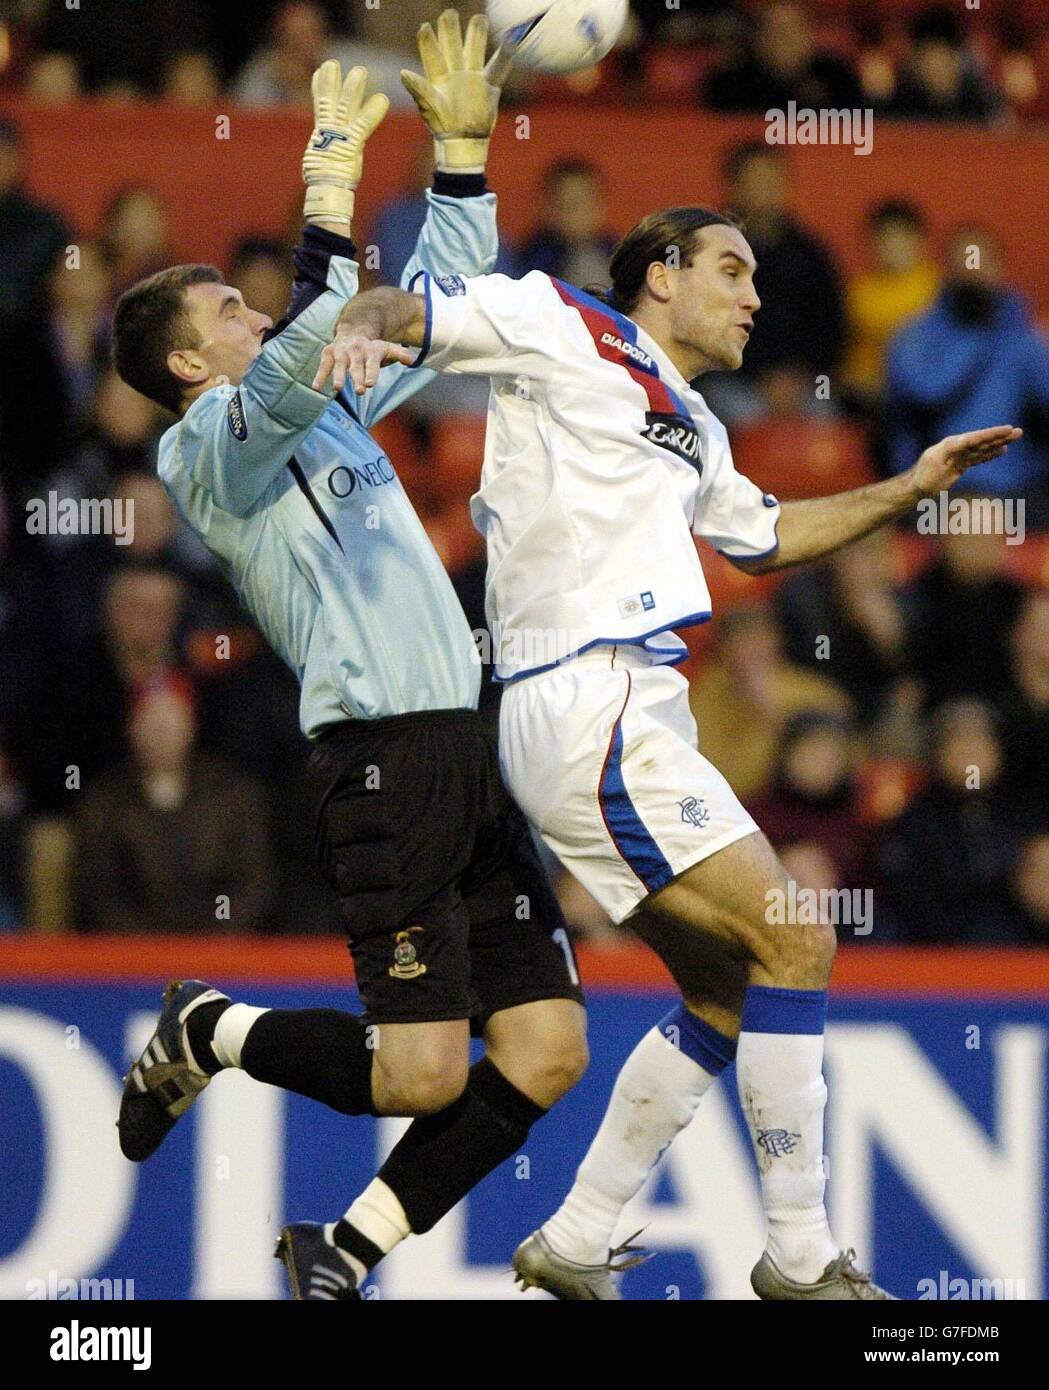 Rangers' Dado Prso challenges Inverness Caledonian Thistle goalkeeper Mark Brown during the Bank of Scotland Premier League match at Pittodrie, Aberdeen. FOR EDITORIAL USE ONLY Stock Photo